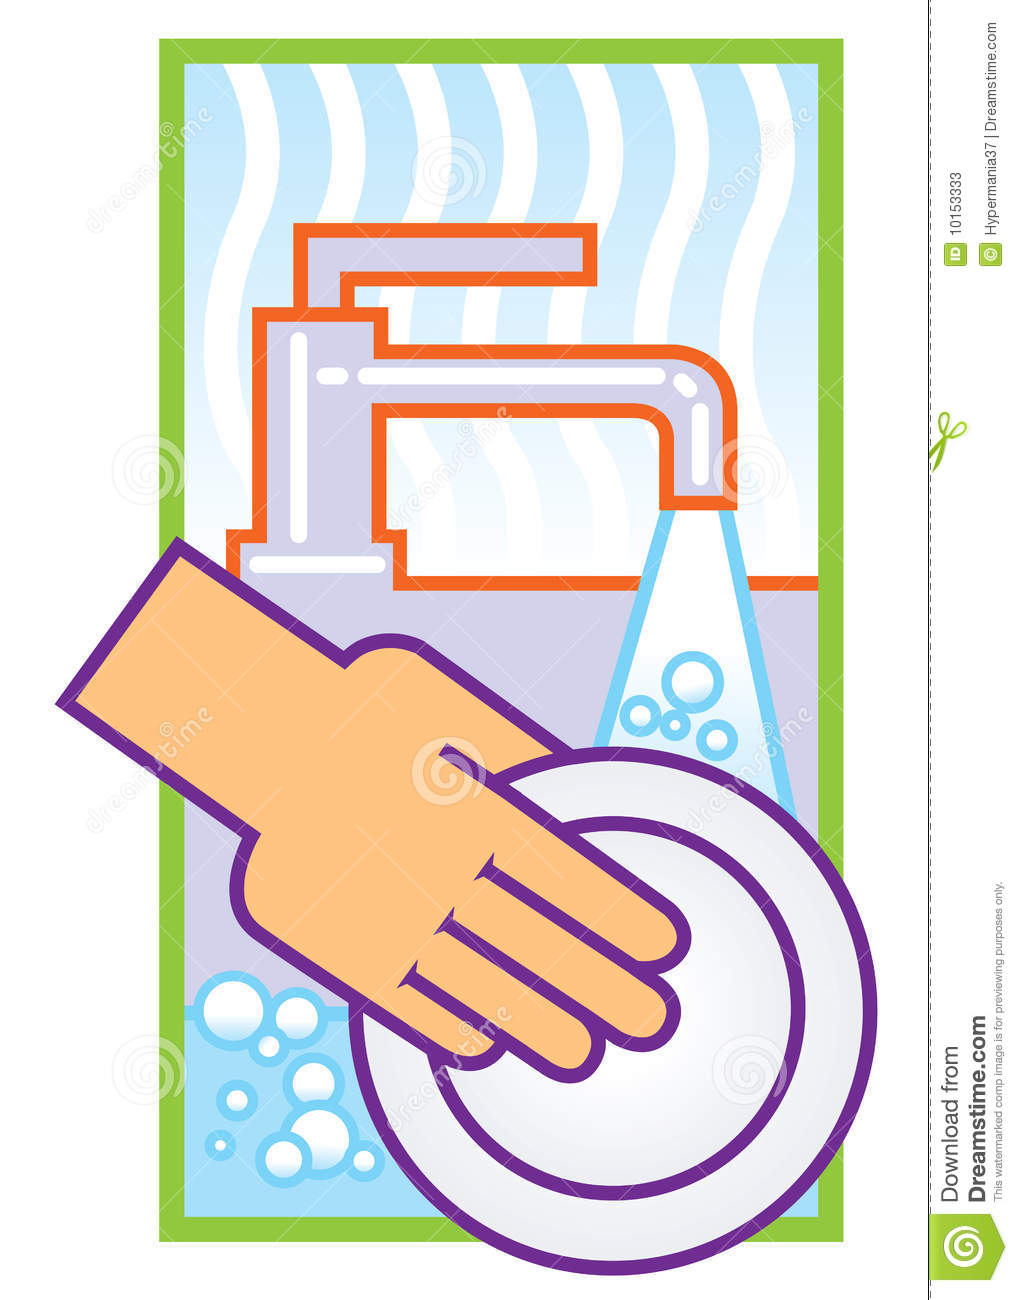 Washing Dishes Clipart.